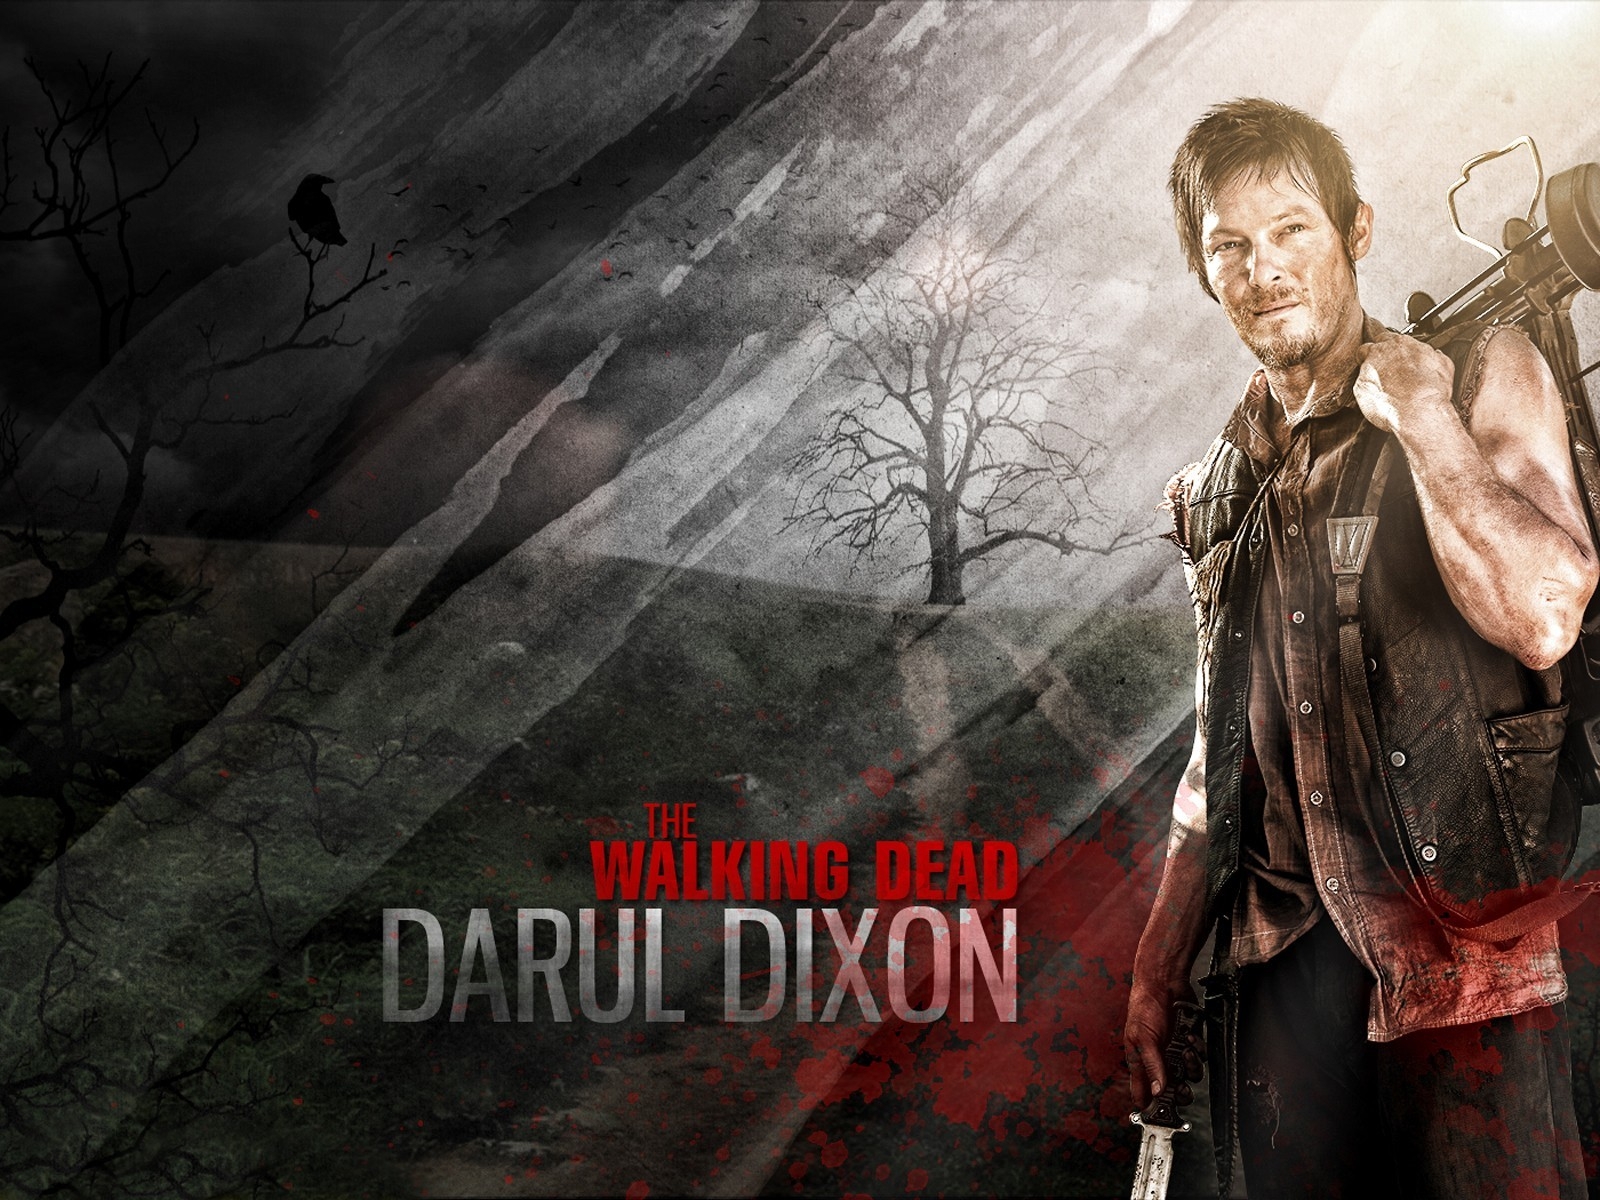 The Walking Dead Daryl Dixon for 1600 x 1200 resolution